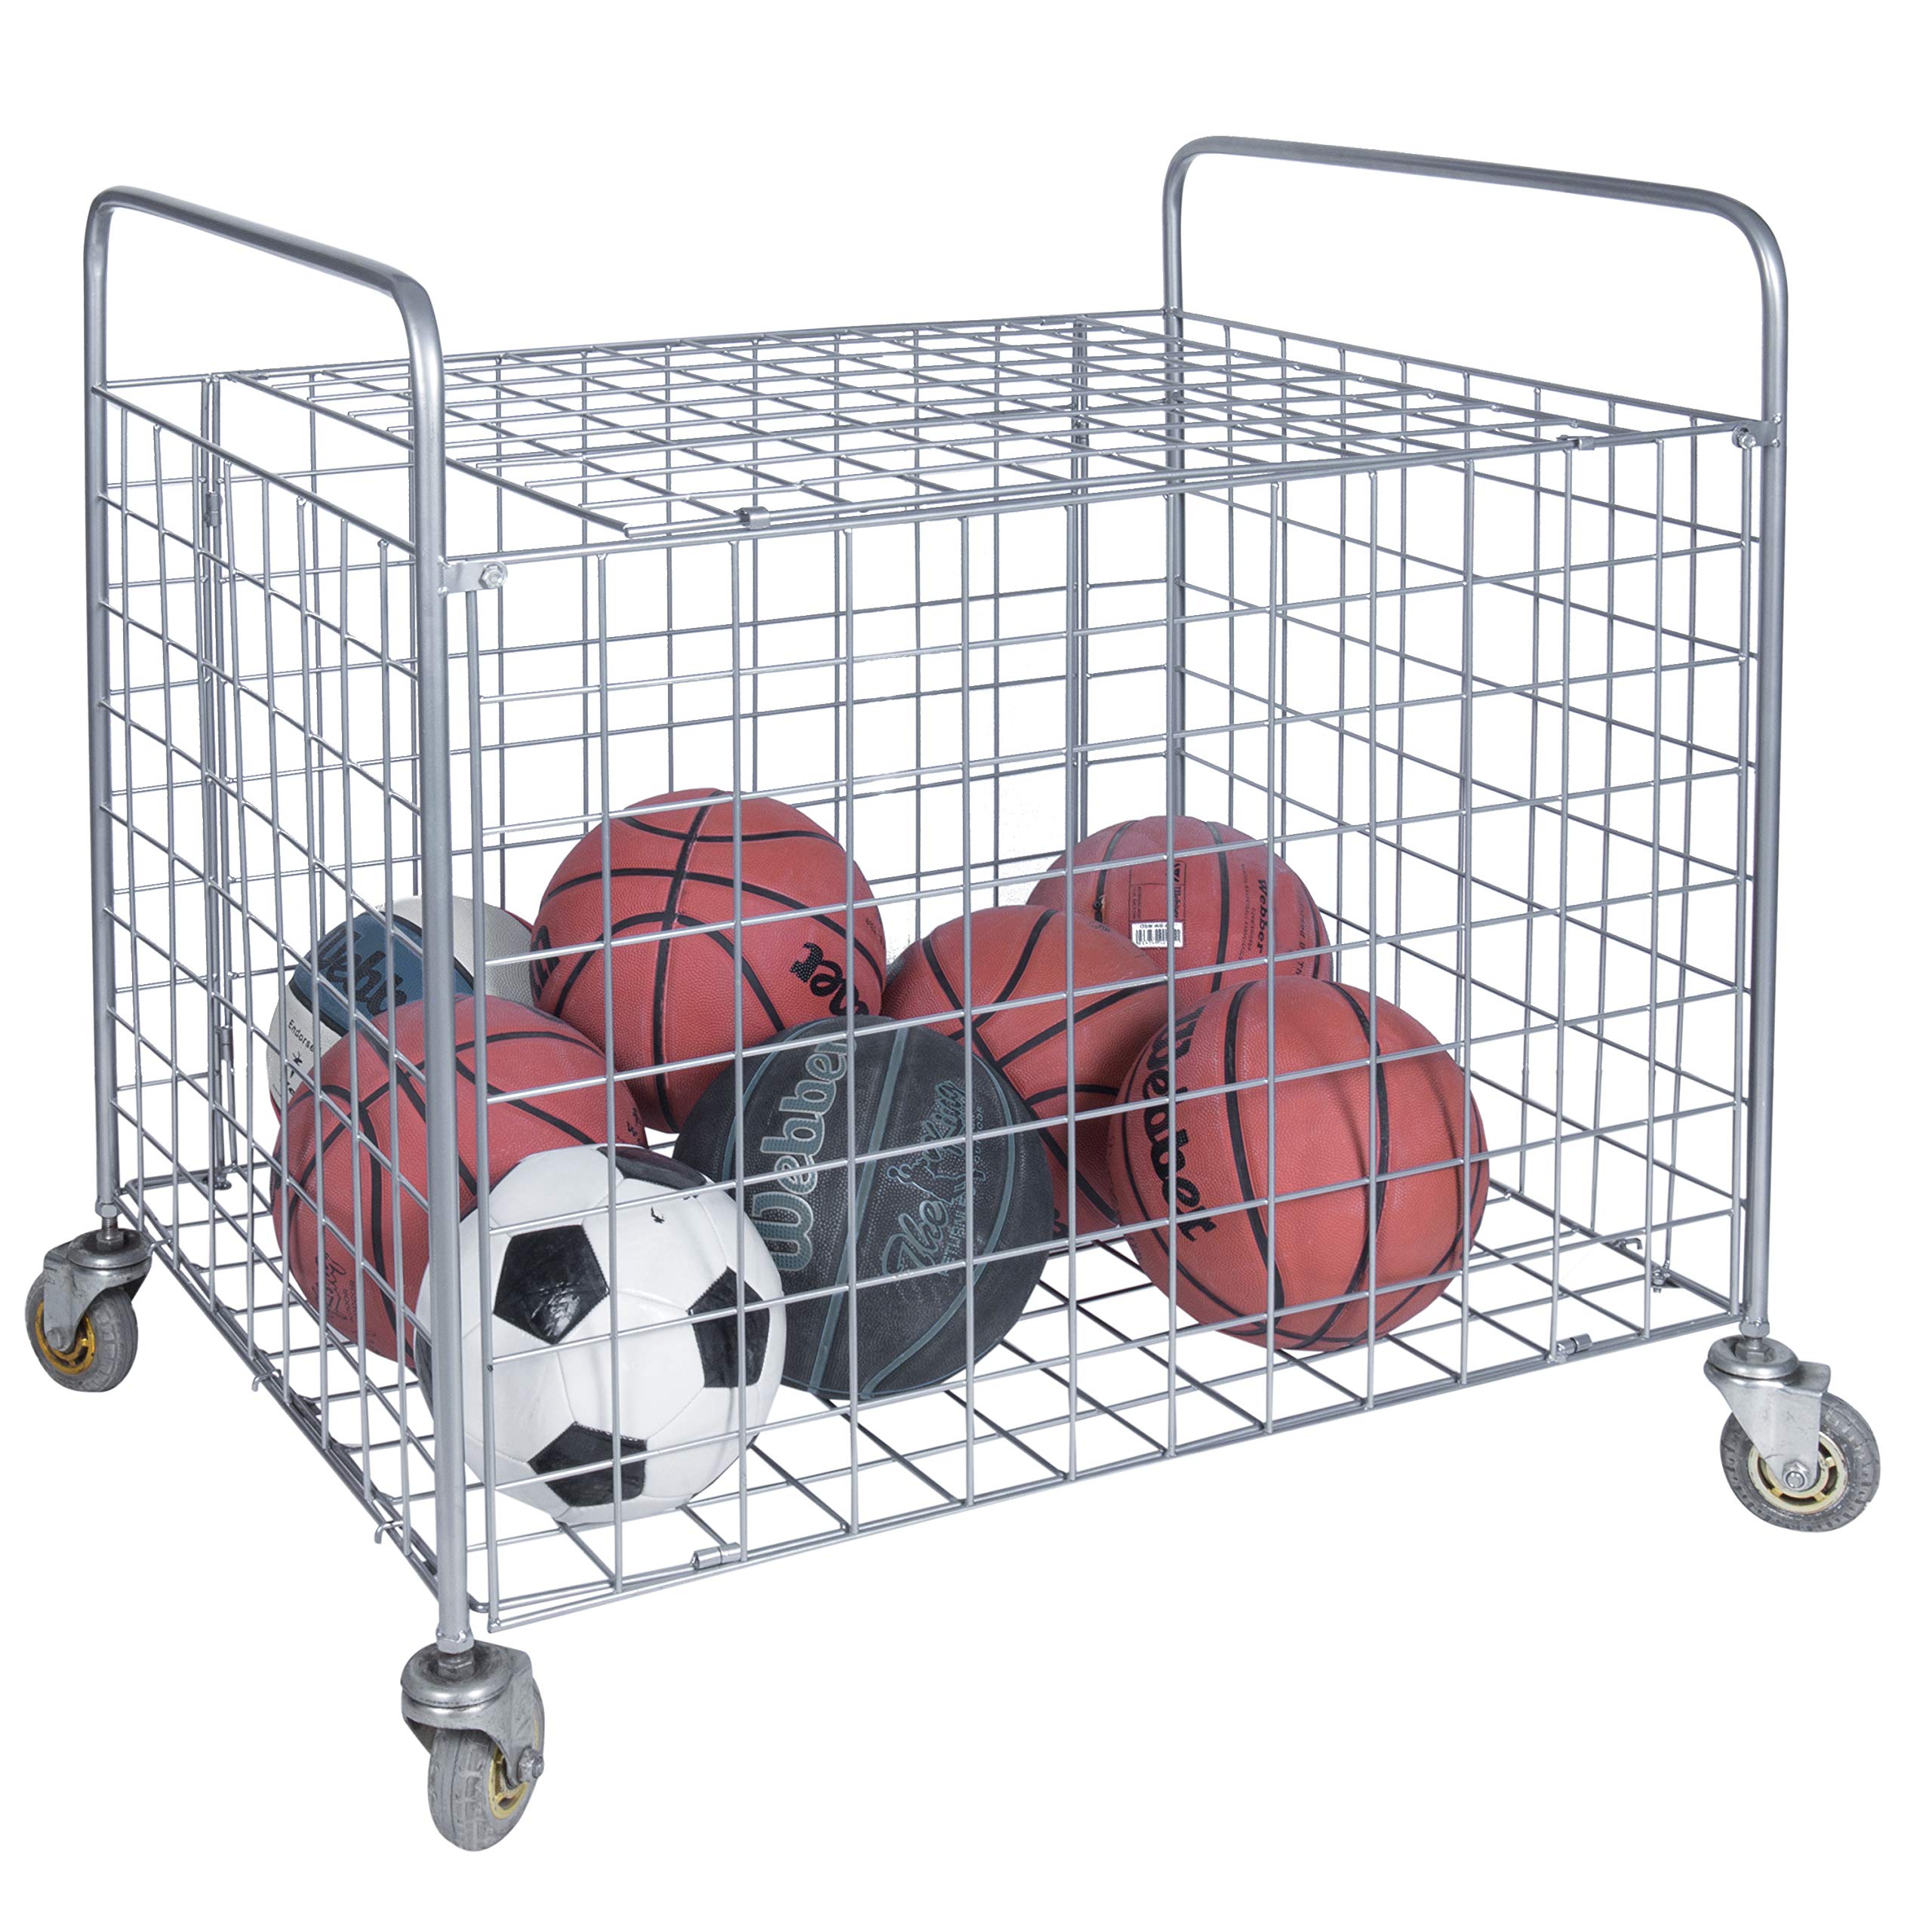 MyGift Professional Gym Chrome Silver Metal Multi Sports Ball Storage Cart with Jumbo Industrial Wheels, Commercial Grade Portable Equipment Locker Cage for Basketball, Football, Soccer, Volleyball